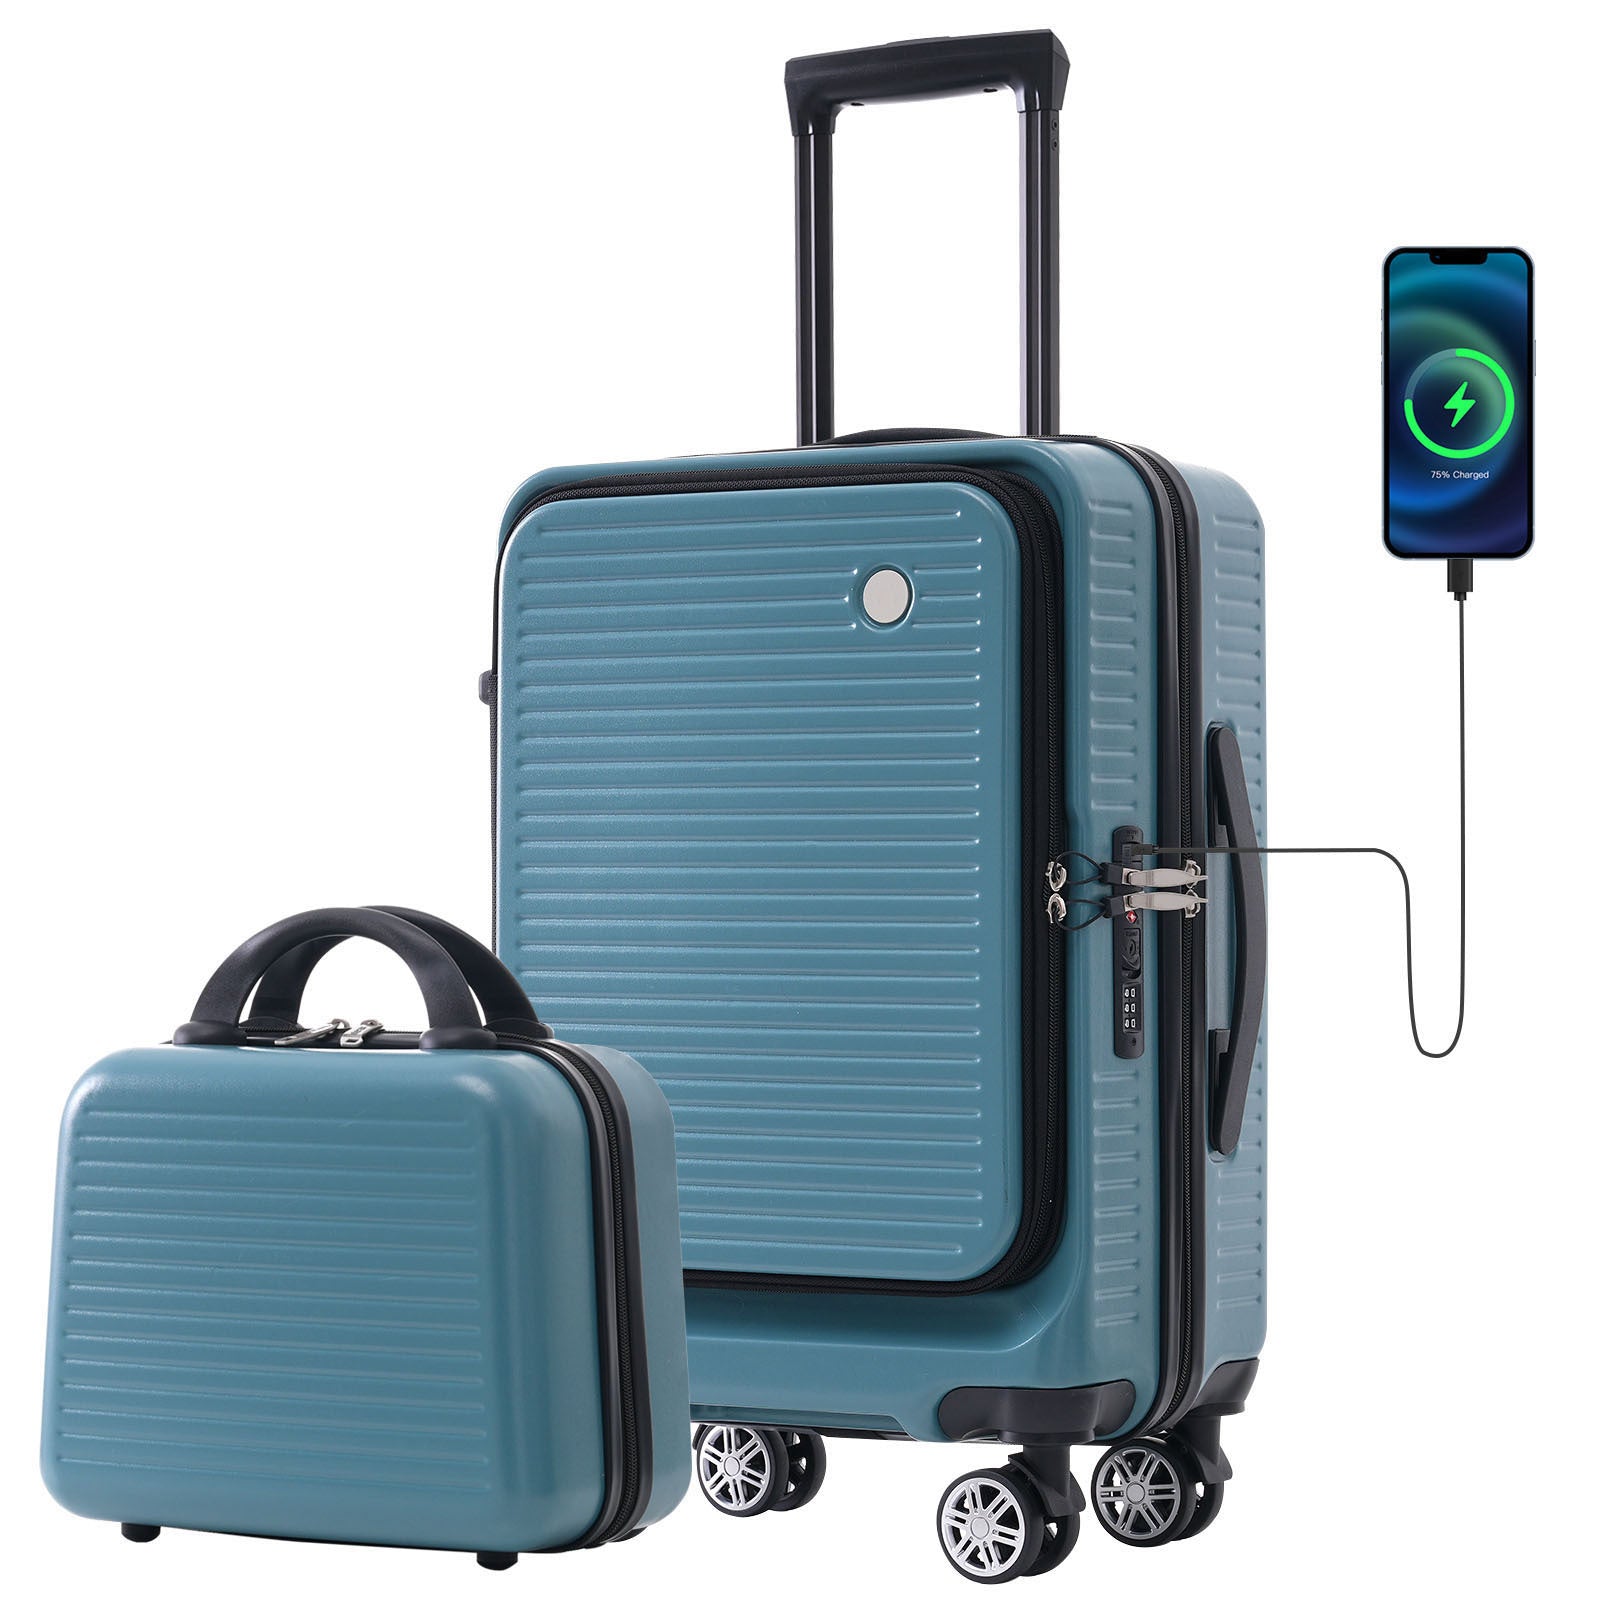 Carry on Luggage 20 Inch Front Open Luggage blue-abs